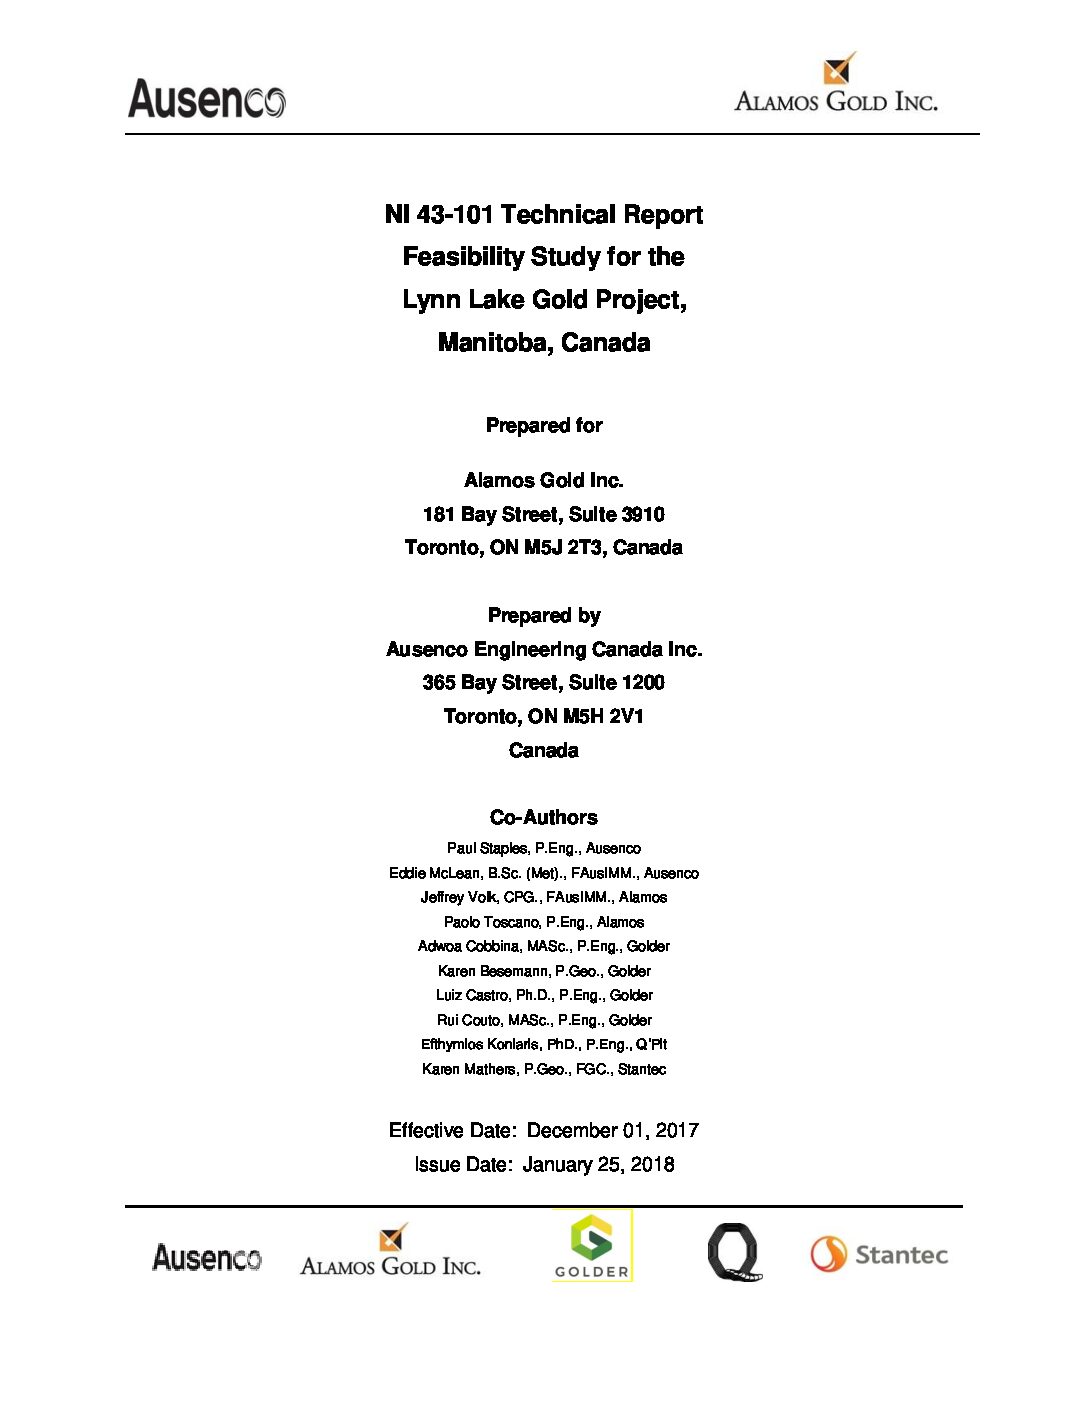 Technical Report 2018: Feasibility Study for the Lynn Lake Gold Project (PDF)